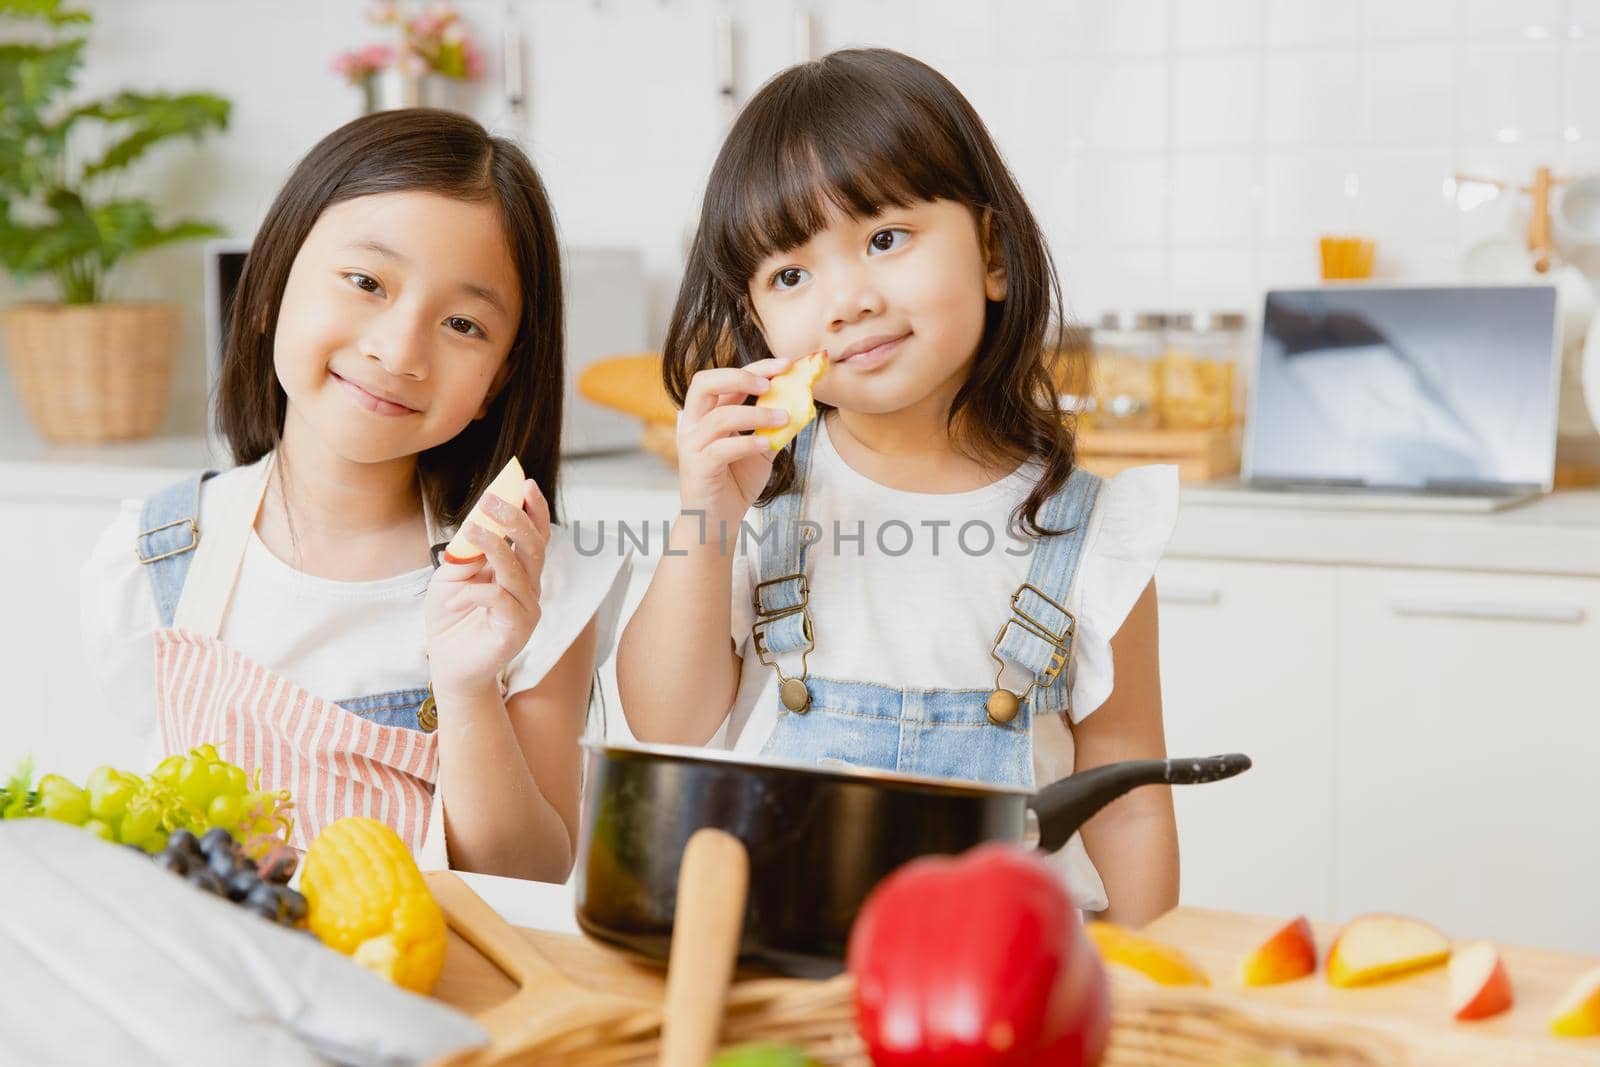 portrait healthy girl childs happy playing together in the kitchen eating apple fruit by qualitystocks